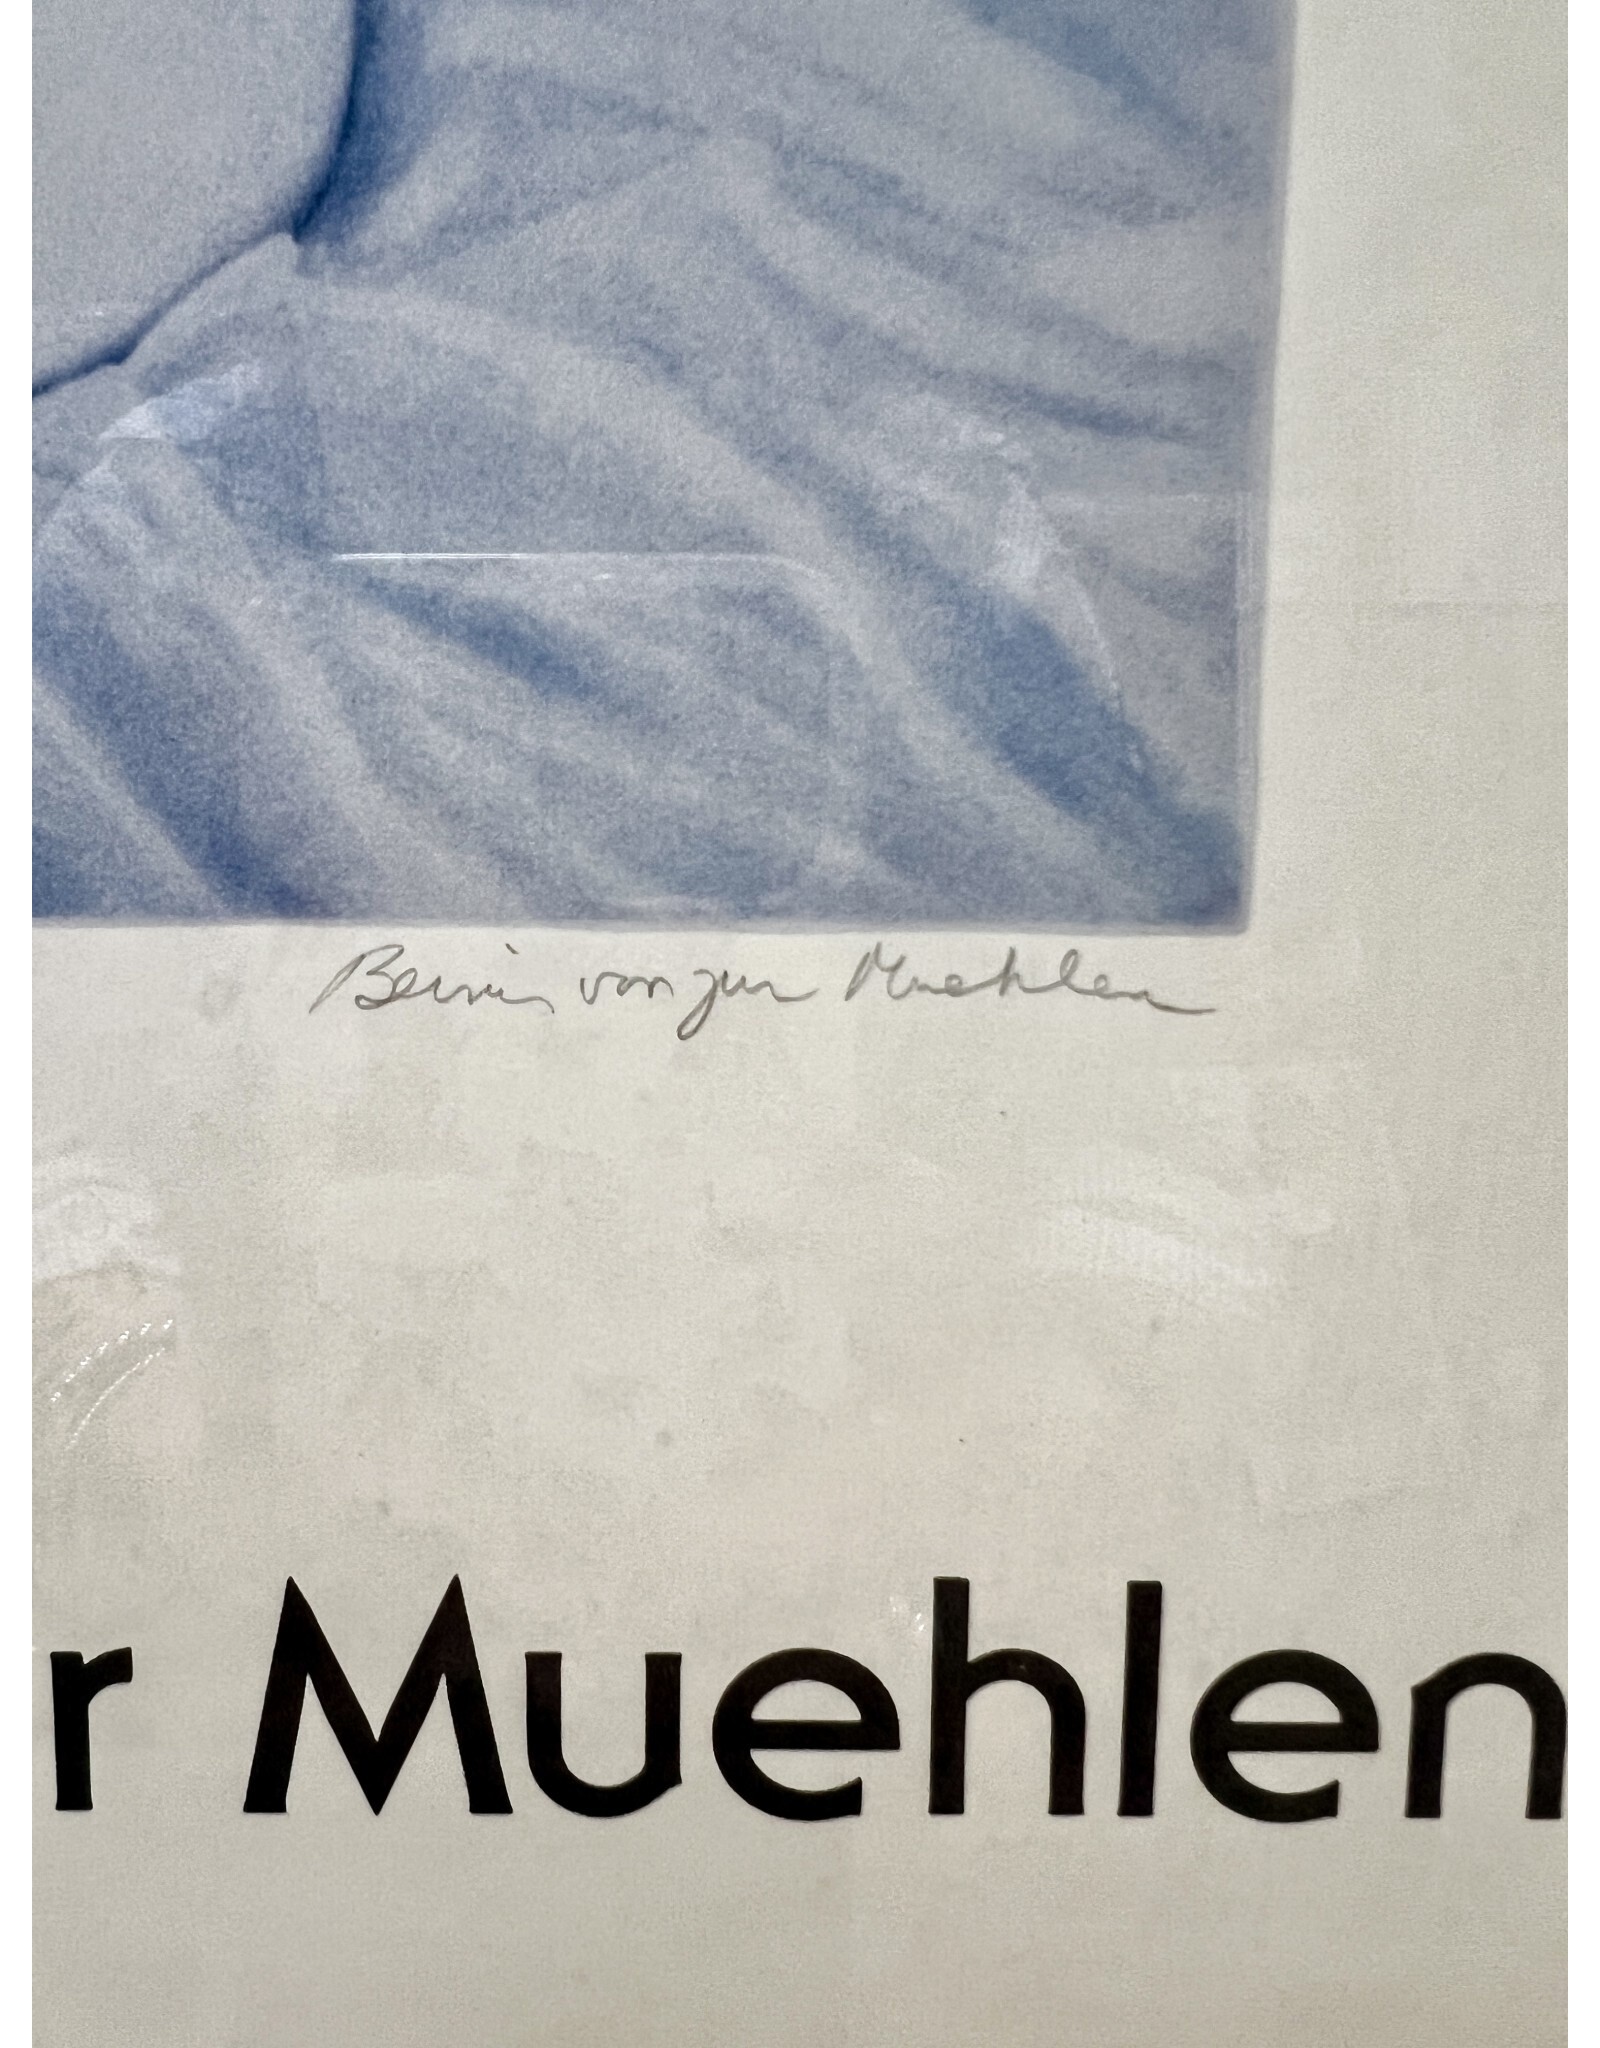 Bernis von zur Muehlen at the Baltimore Museum of Art, framed and signed exhibition poster, 439/750